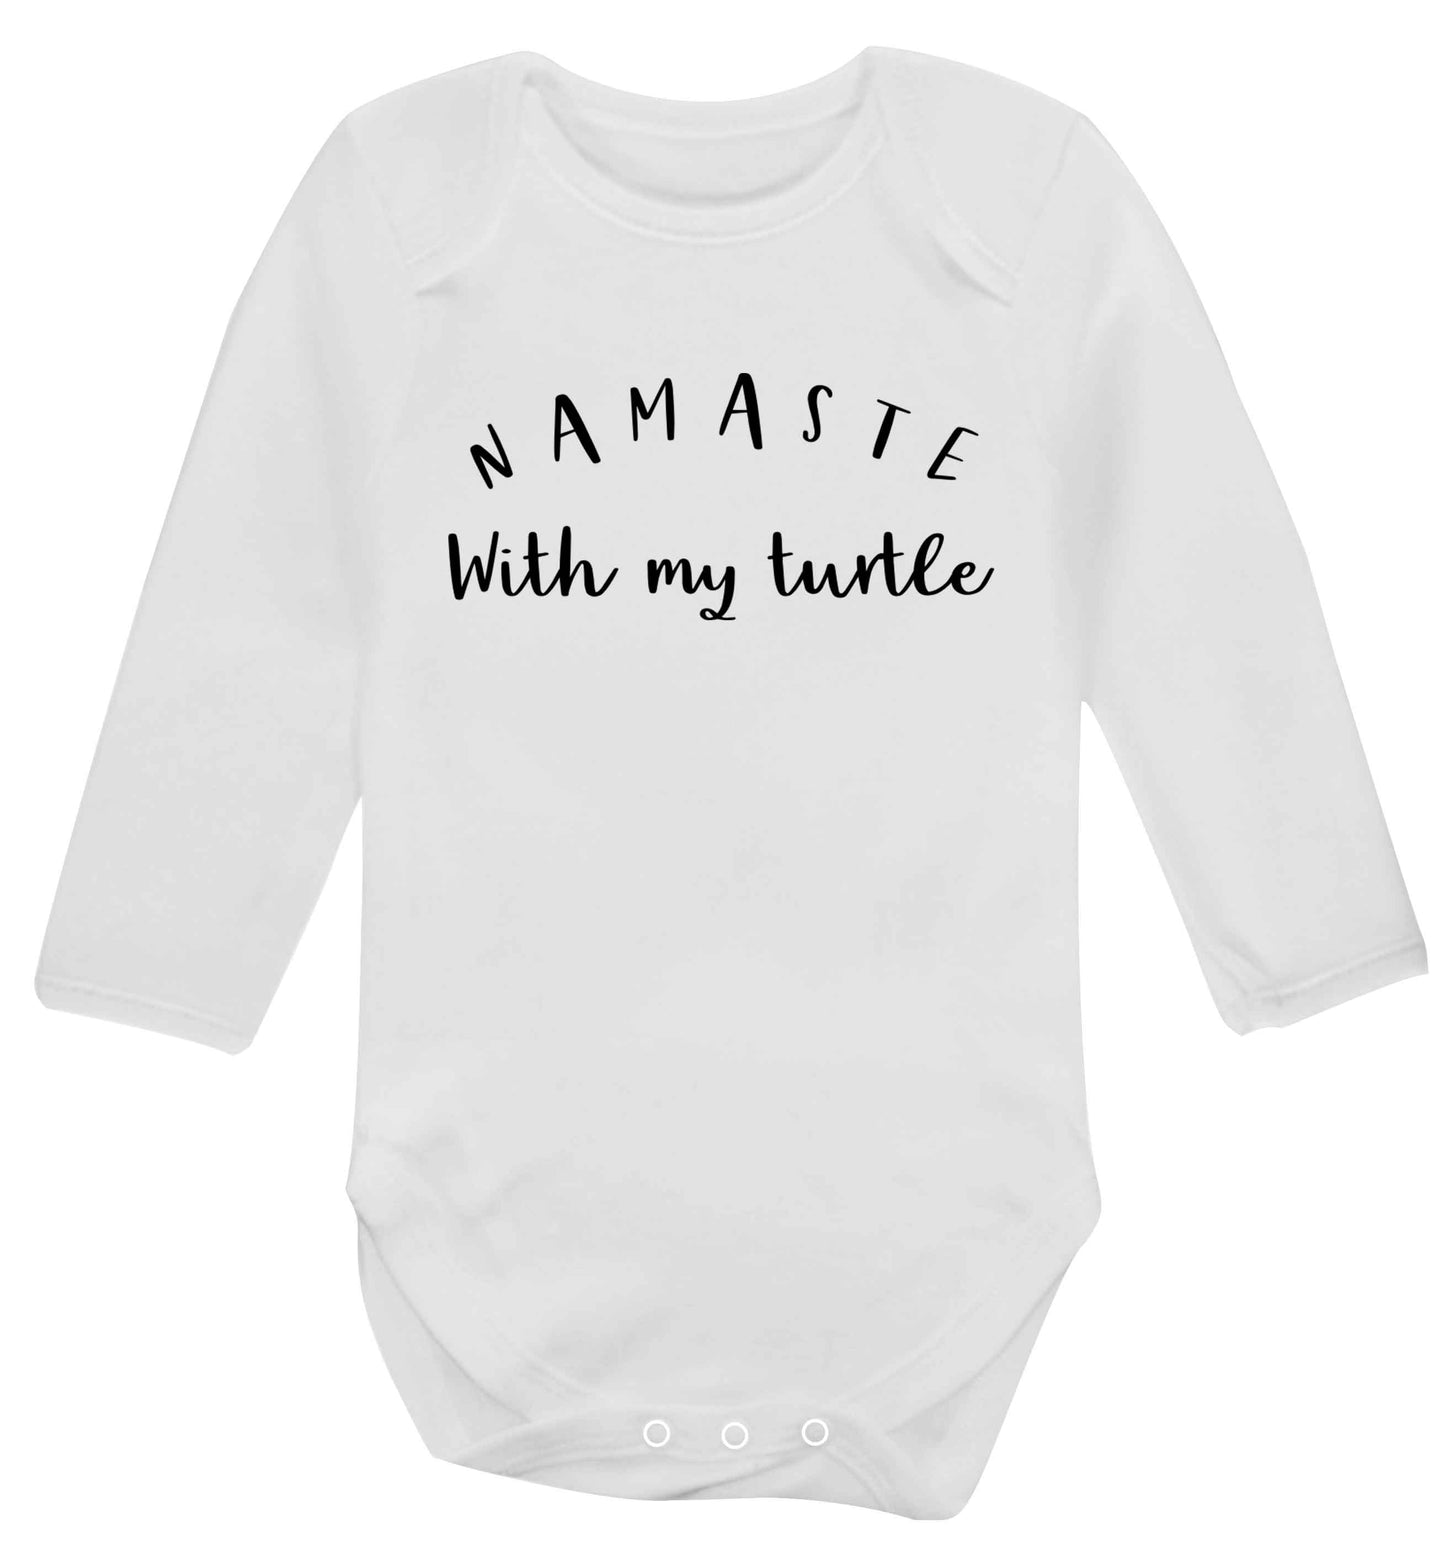 Namaste with my turtle Baby Vest long sleeved white 6-12 months